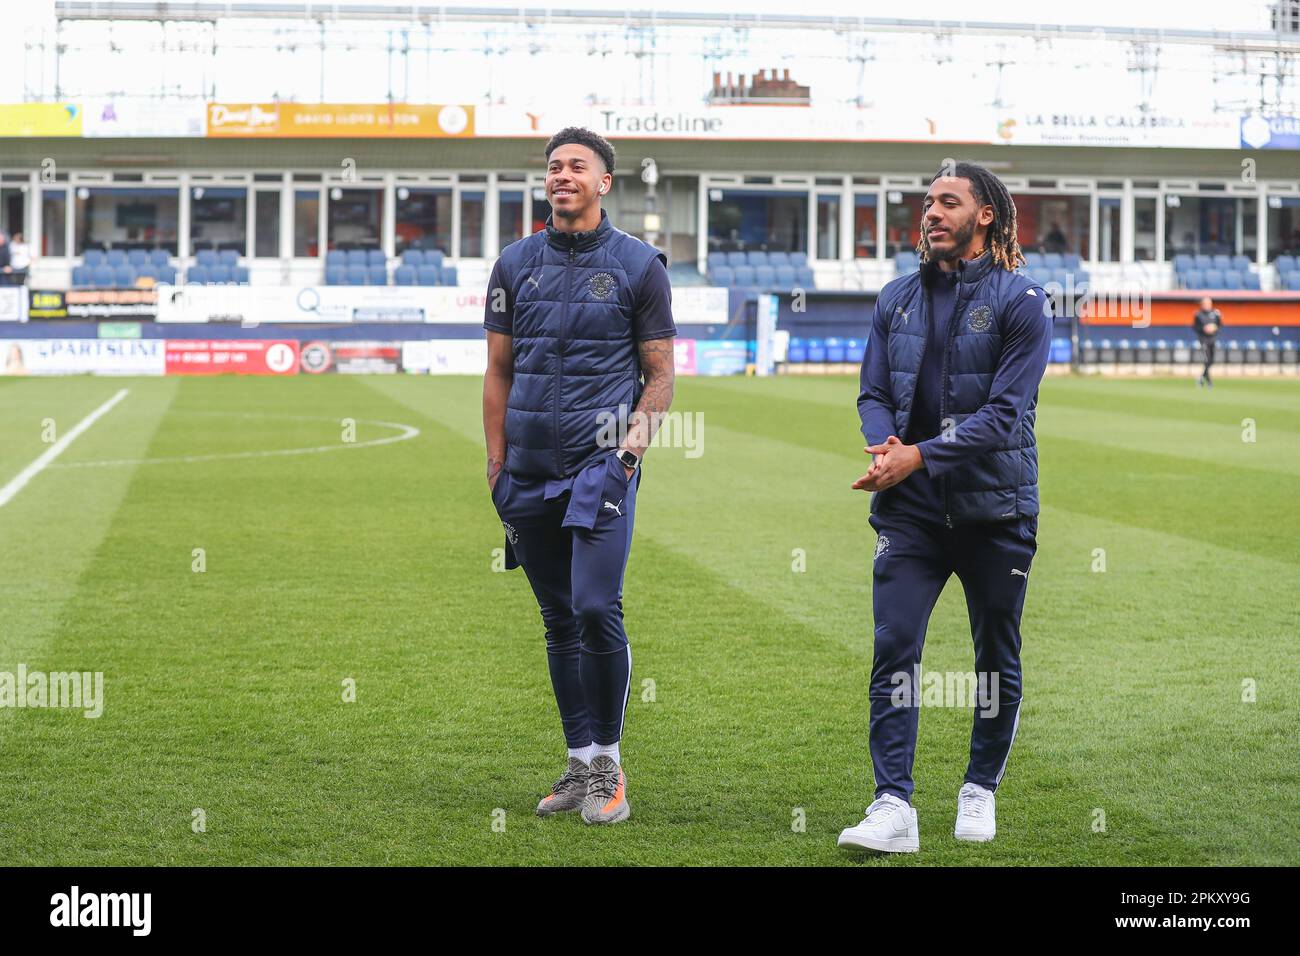 jordan-lawrence-gabriel-4-of-blackpool-and-dominic-thompson-23-of-blackpool-arrive-ahead-of-the-sky-bet-championship-match-luton-town-vs-blackpool-at-kenilworth-road-luton-united-kingdom-10th-april-2023-photo-by-gareth-evansnews-images-2PKXY9G.jpg